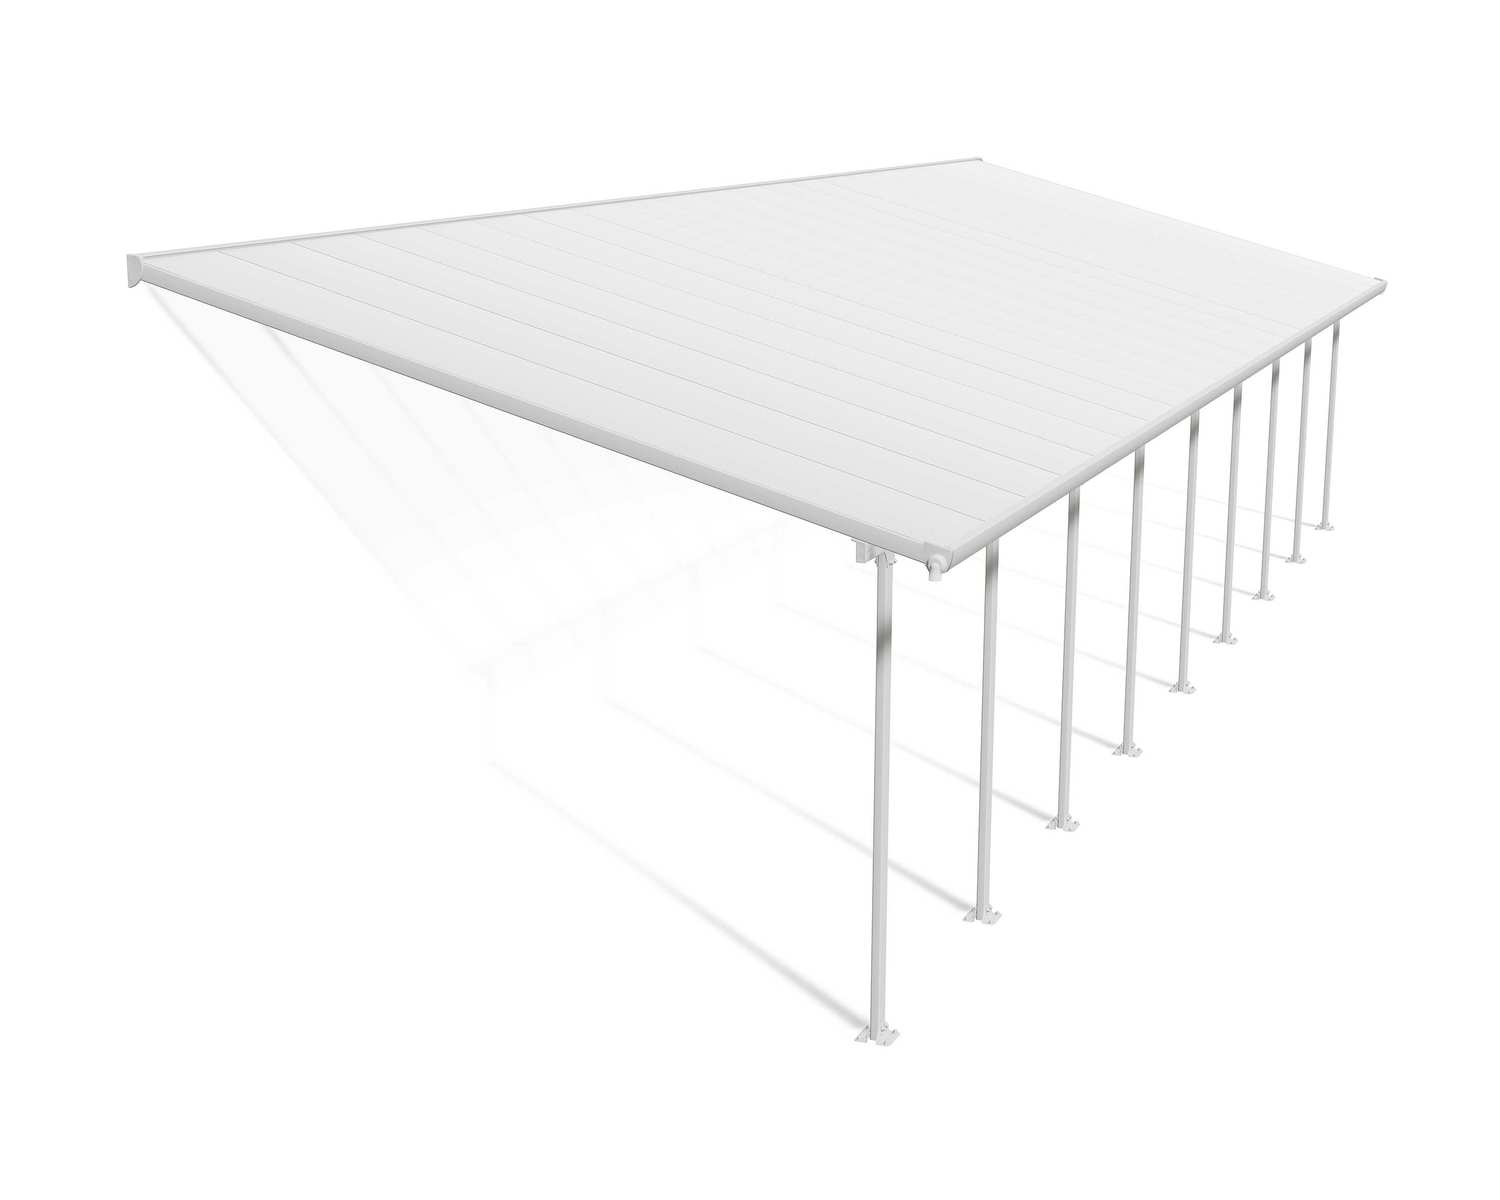 Feria 13 ft. x 42 ft. White Aluminium Patio Cover With 9 Posts, White Twin-Wall Polycarbonate Roof Panels.